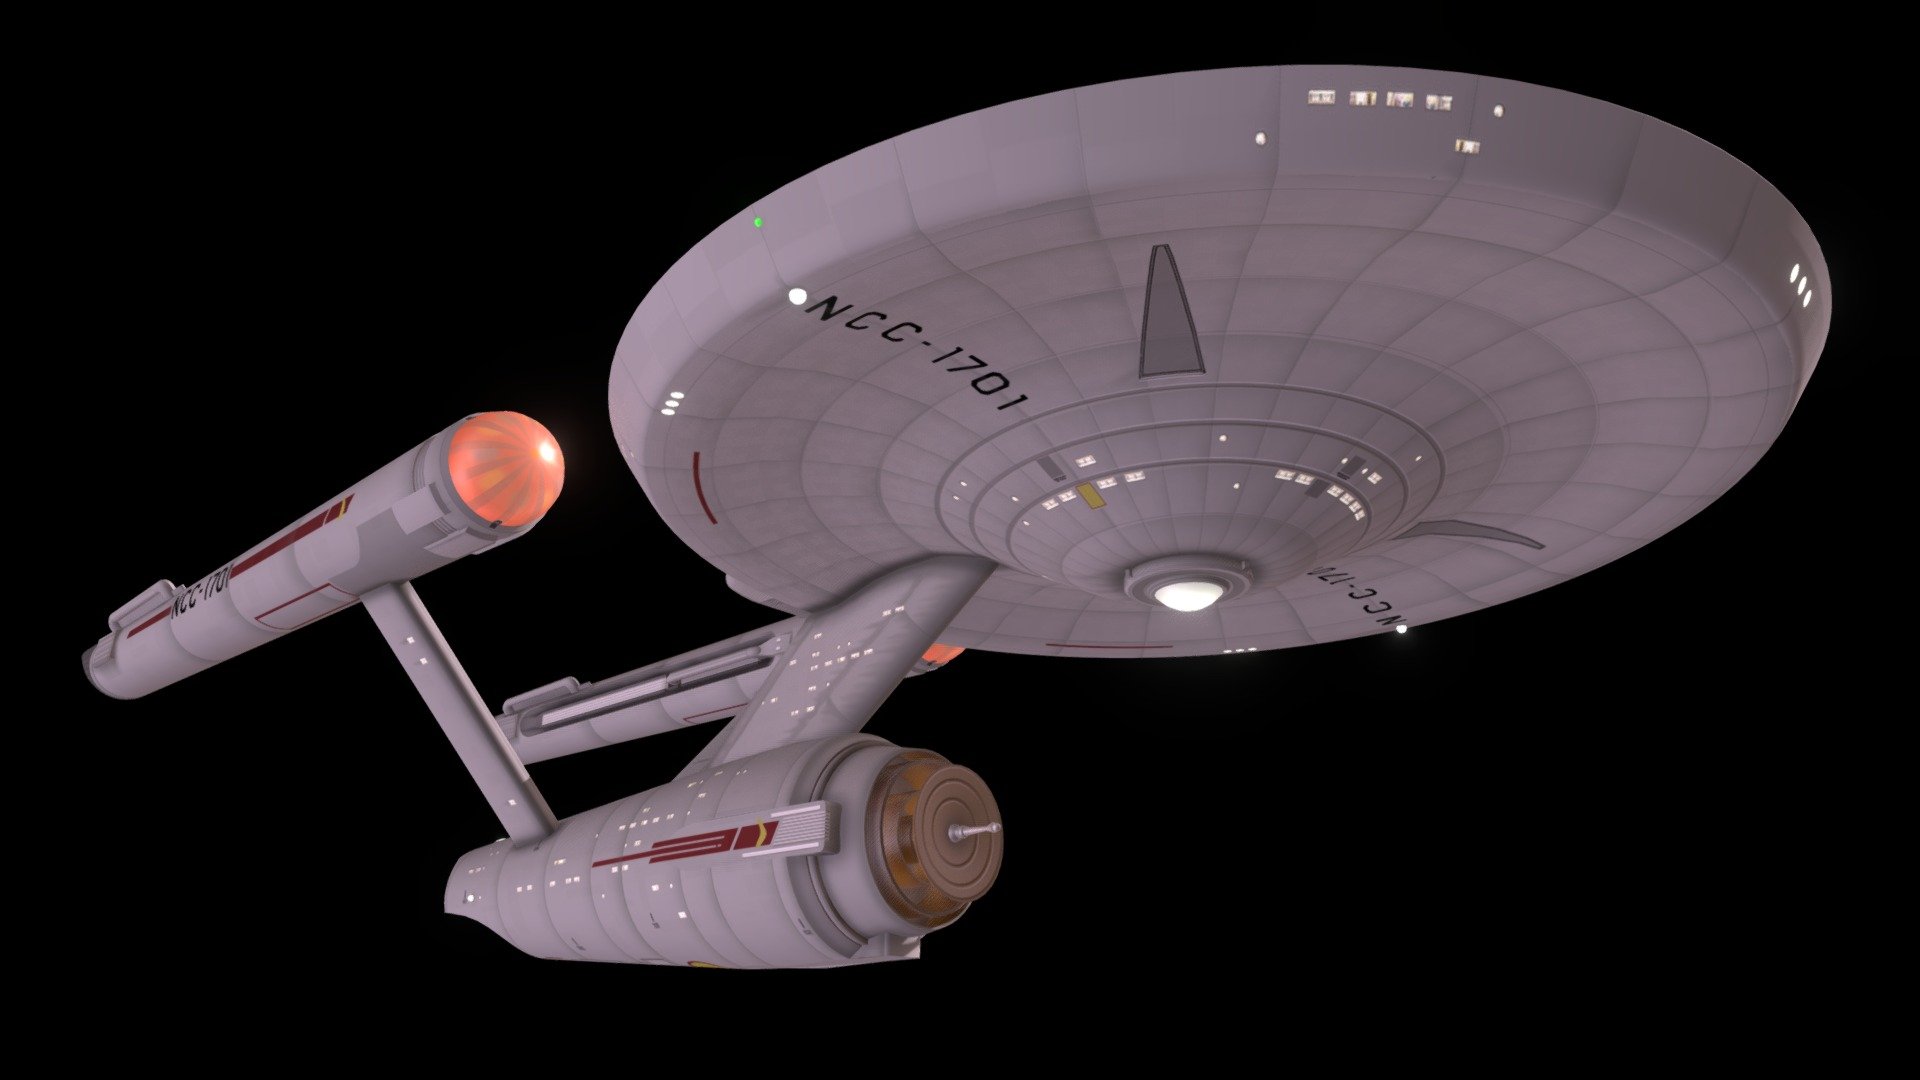 uss enterprise star trek what does uss stand for